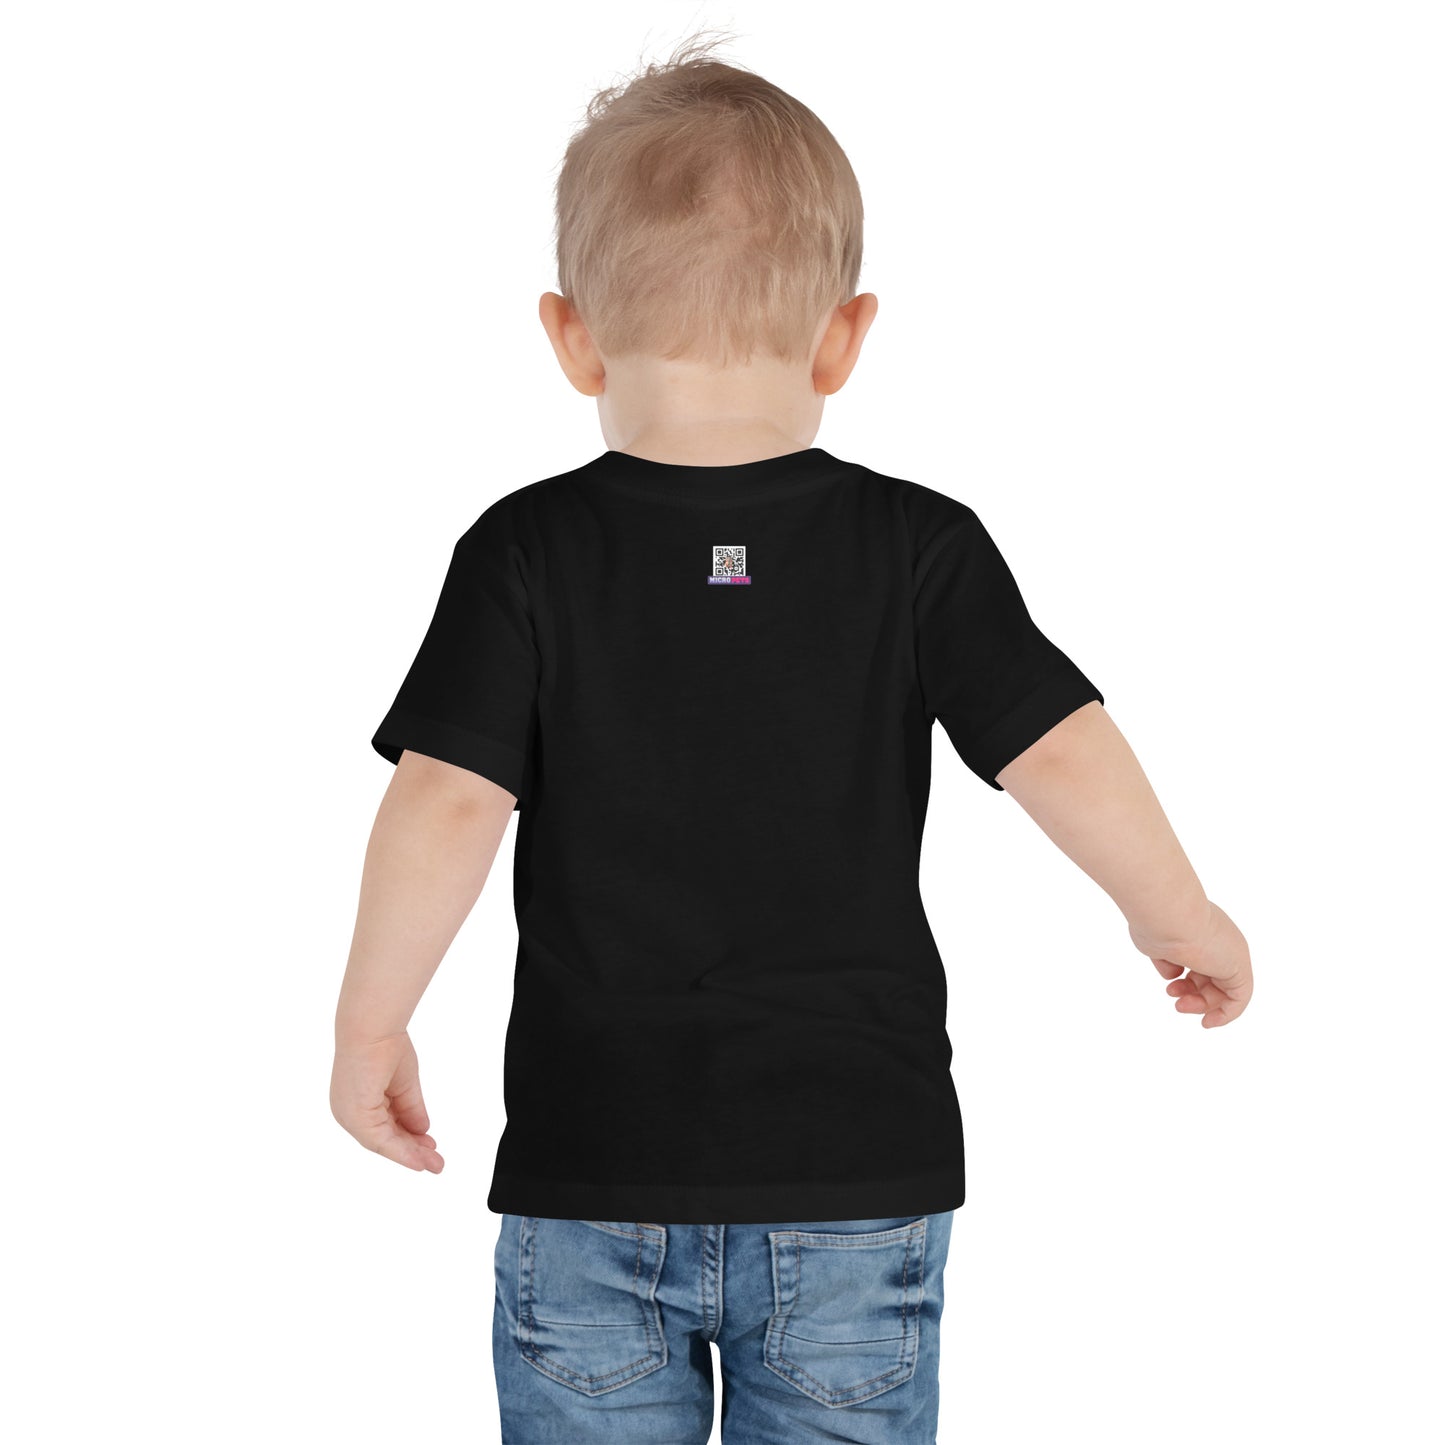 Micropets Toddler Short Sleeve Tee